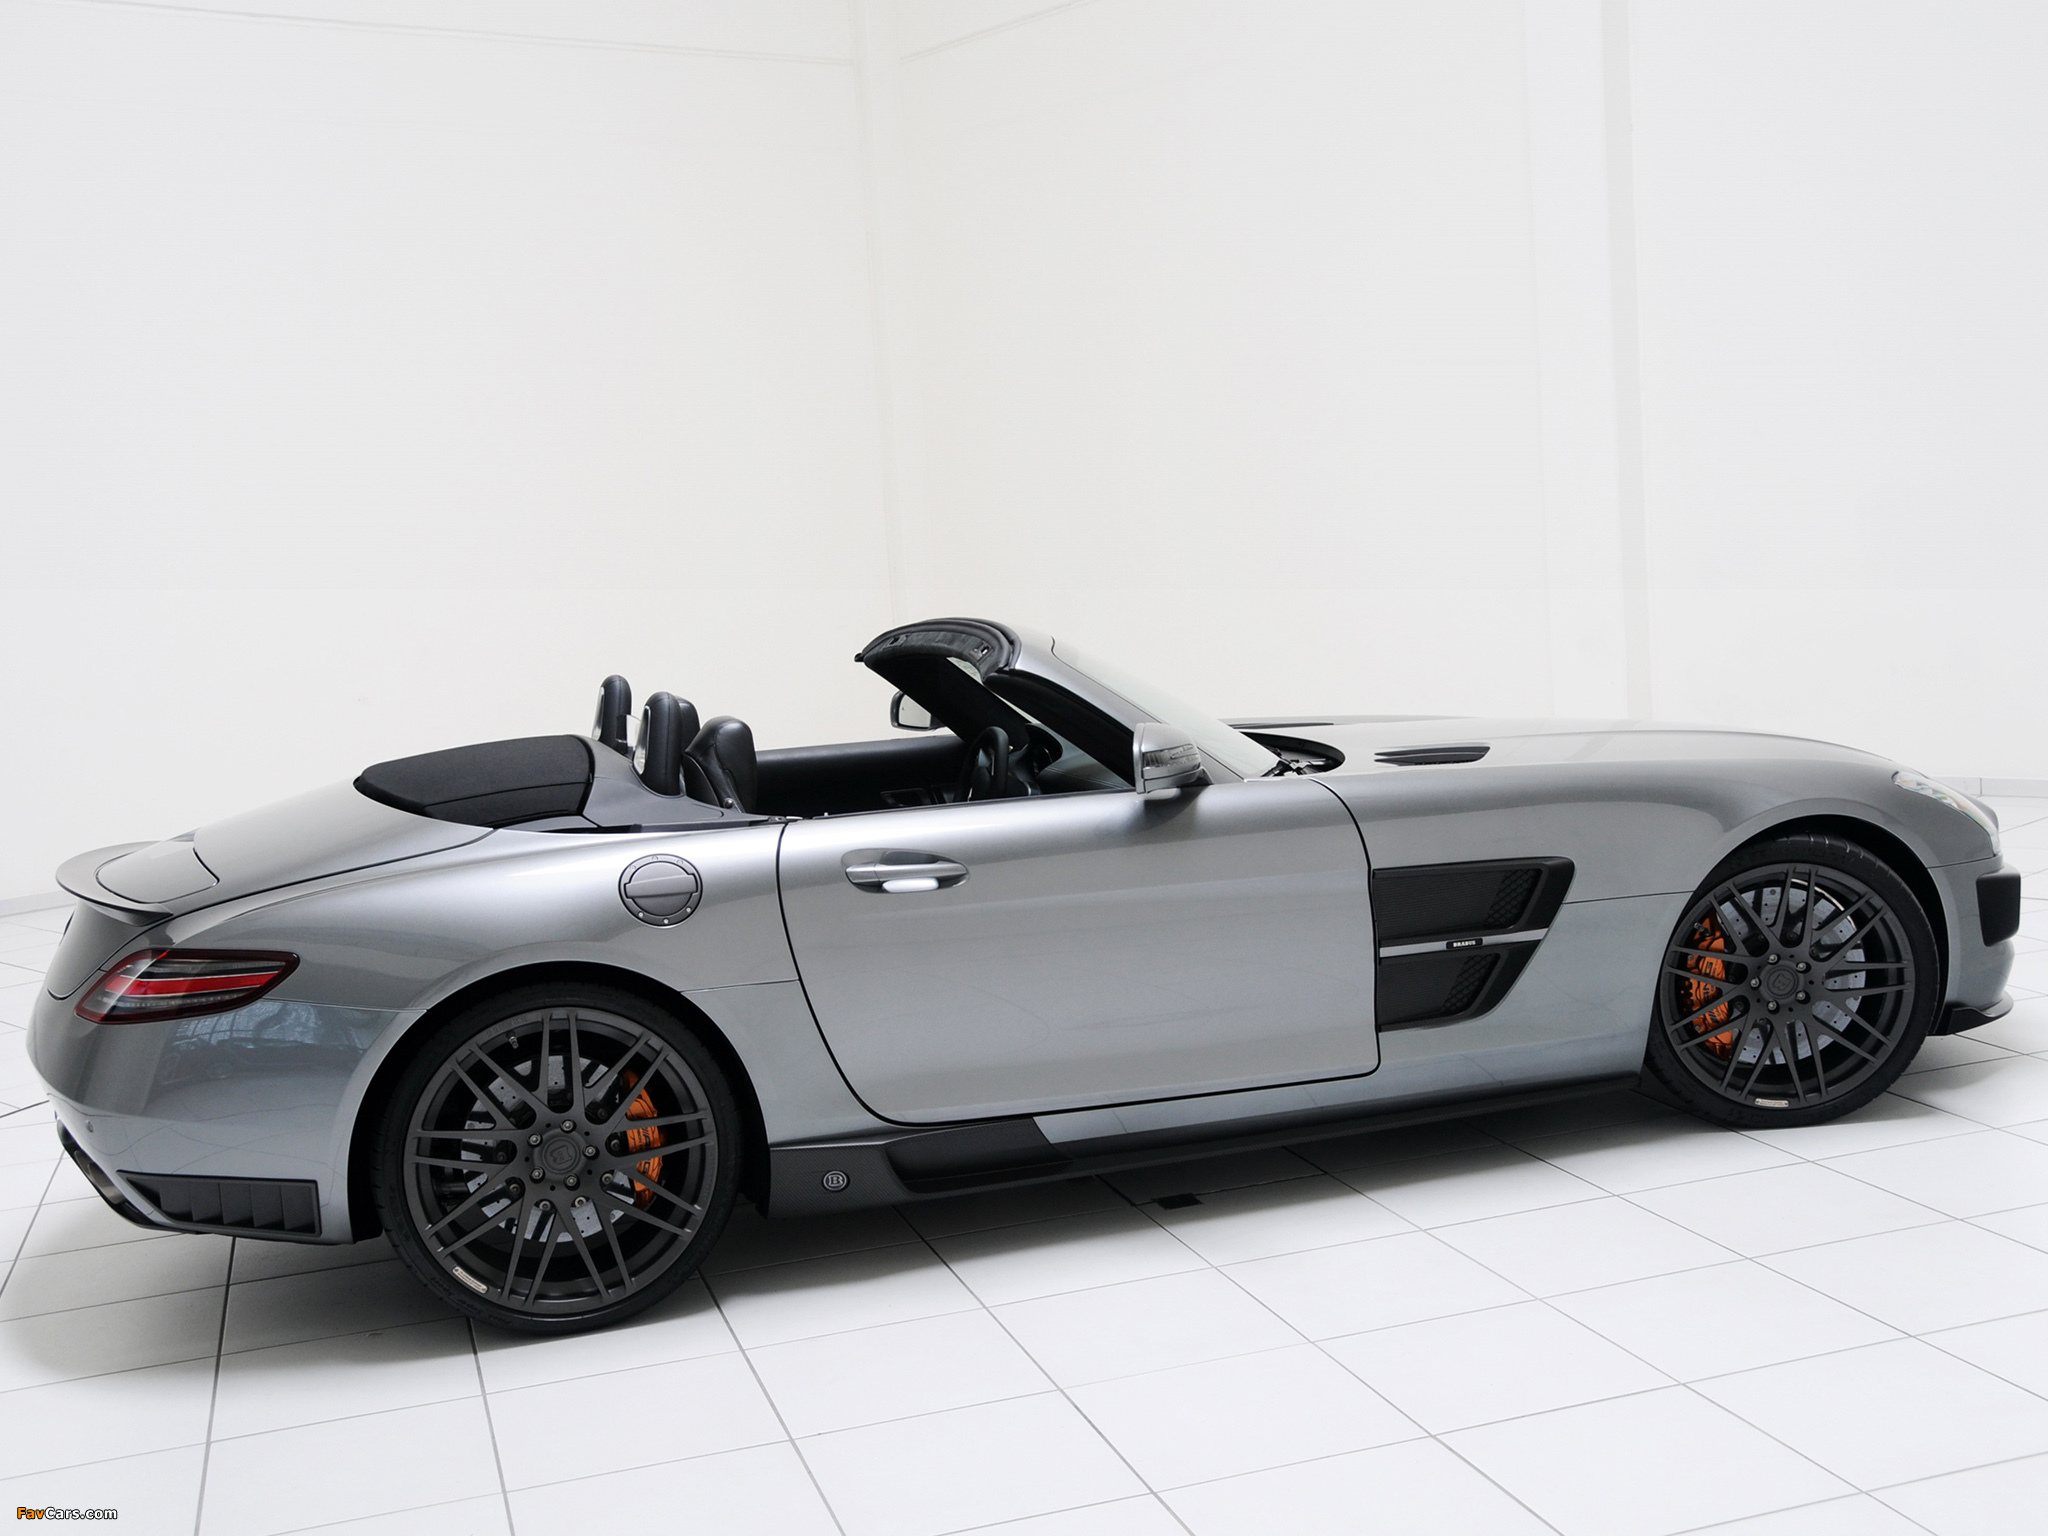 Brabus Mercedes-Benz SLS 63 AMG Roadster (R197) 2011 pictures (2048 x 1536)